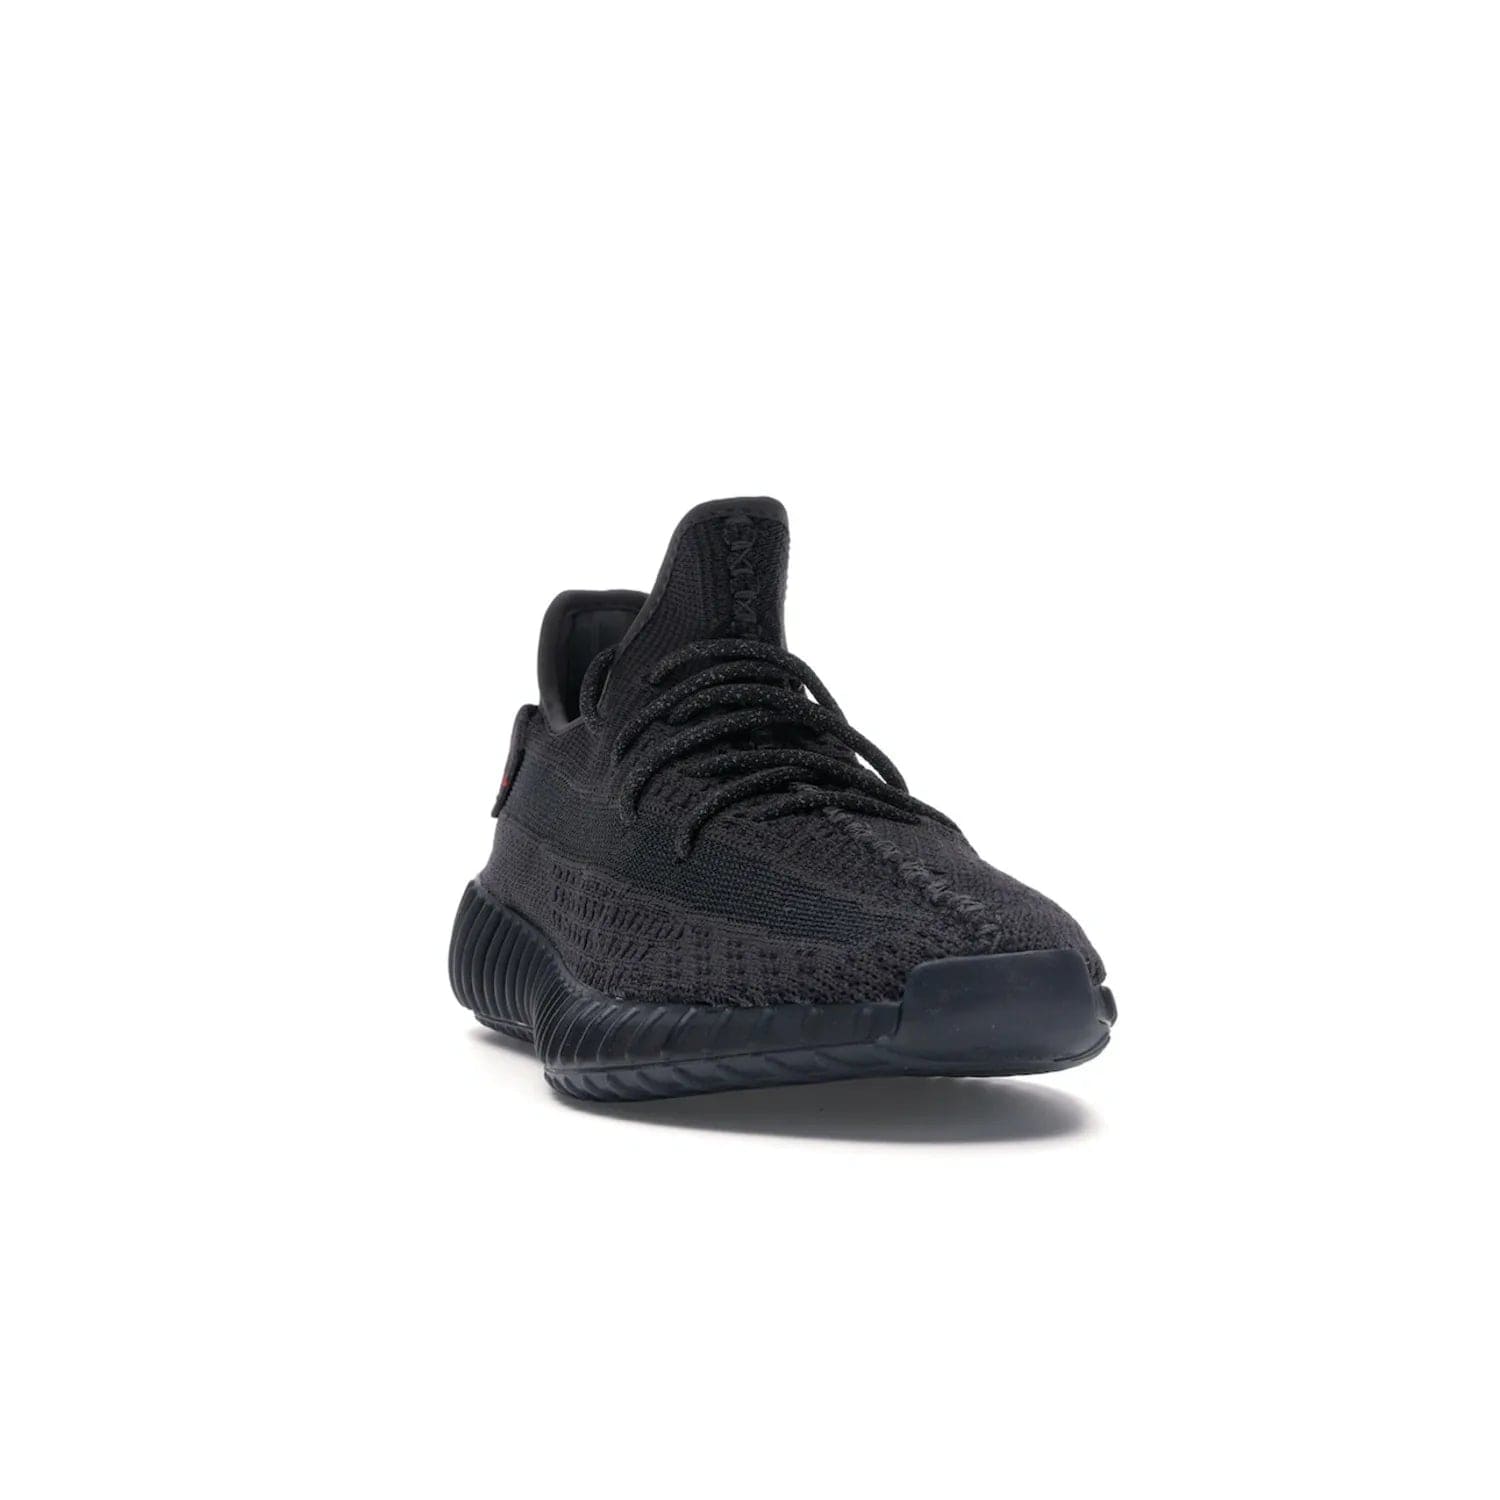 adidas Yeezy Boost 350 V2 Black (Non-Reflective) - Image 8 - Only at www.BallersClubKickz.com - A timeless, sleek silhouette crafted from quality materials. The adidas Yeezy Boost 350 V2 Black (Non-Reflective) brings style and sophistication. Get yours now!